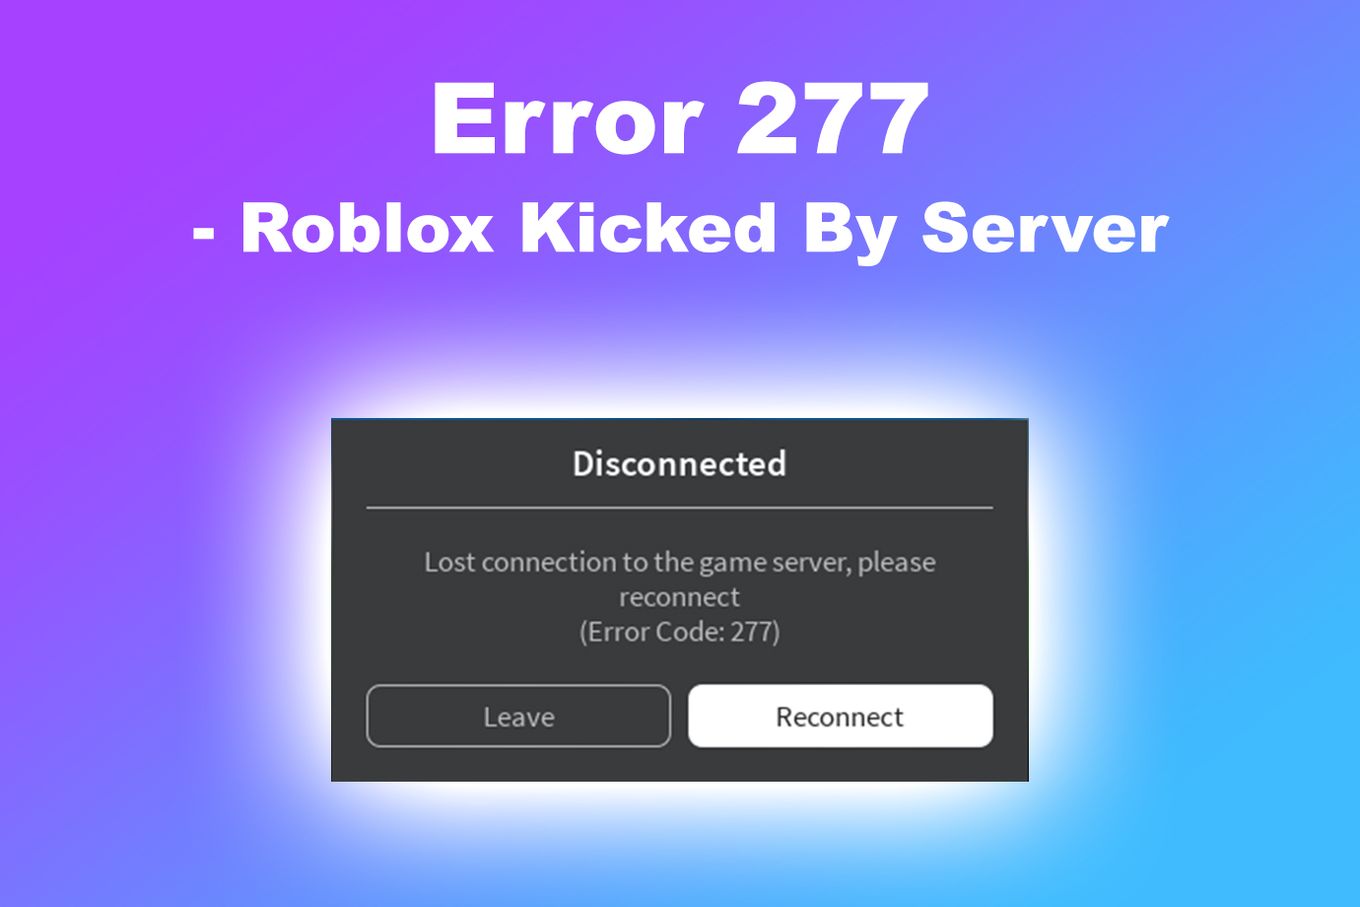 Roblox Error Code 277 Explained: Reasons & How To Fix